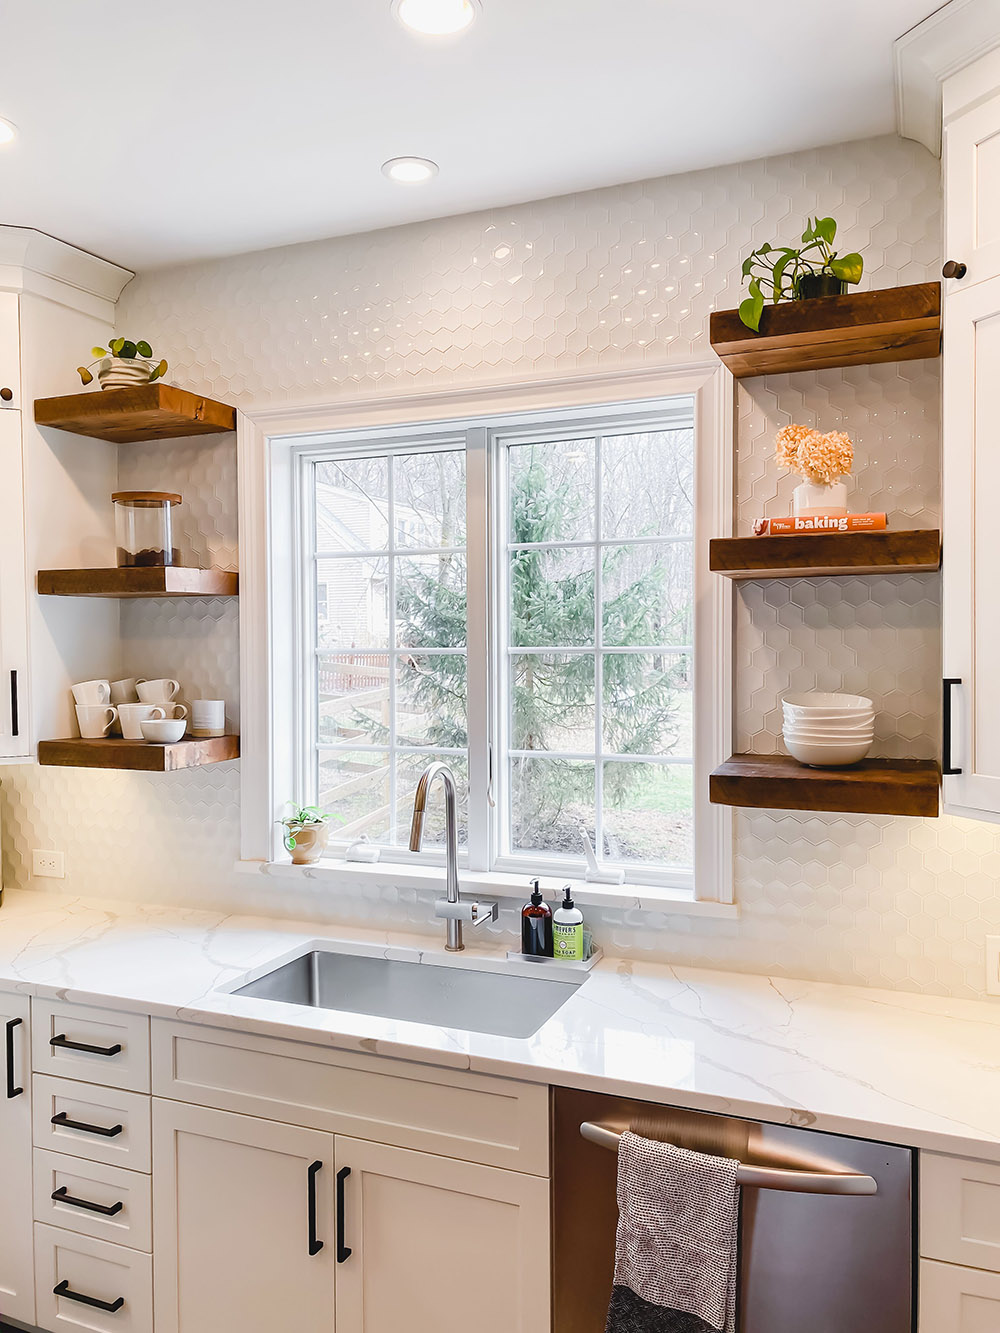 A kitchen sink area with a window surrounded by a tile wall with floating wood shelves.